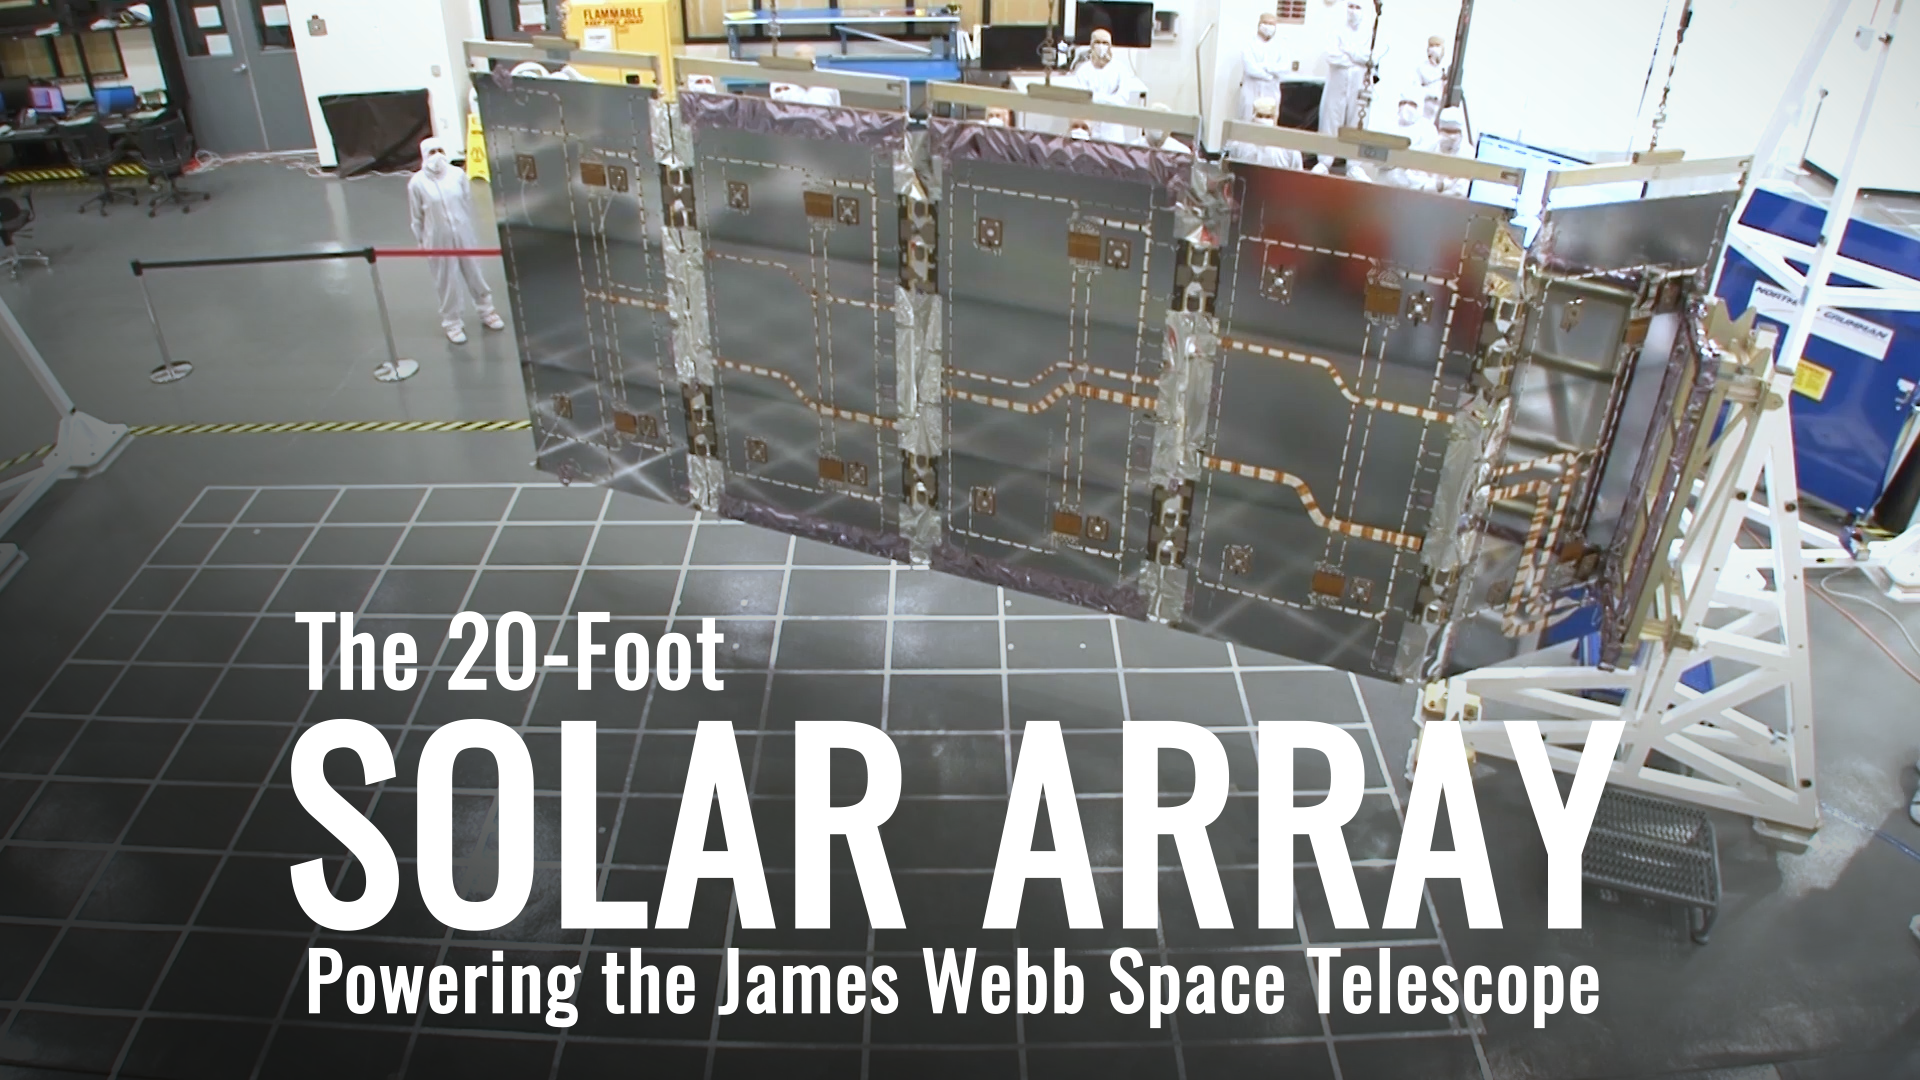 The James Webb Space Telescope's solar array will be used to help power the observatory by converting sunlight into electrical energy.  Presently, it is being tested at Northrop Grumman in Redondo Beach, CA.  